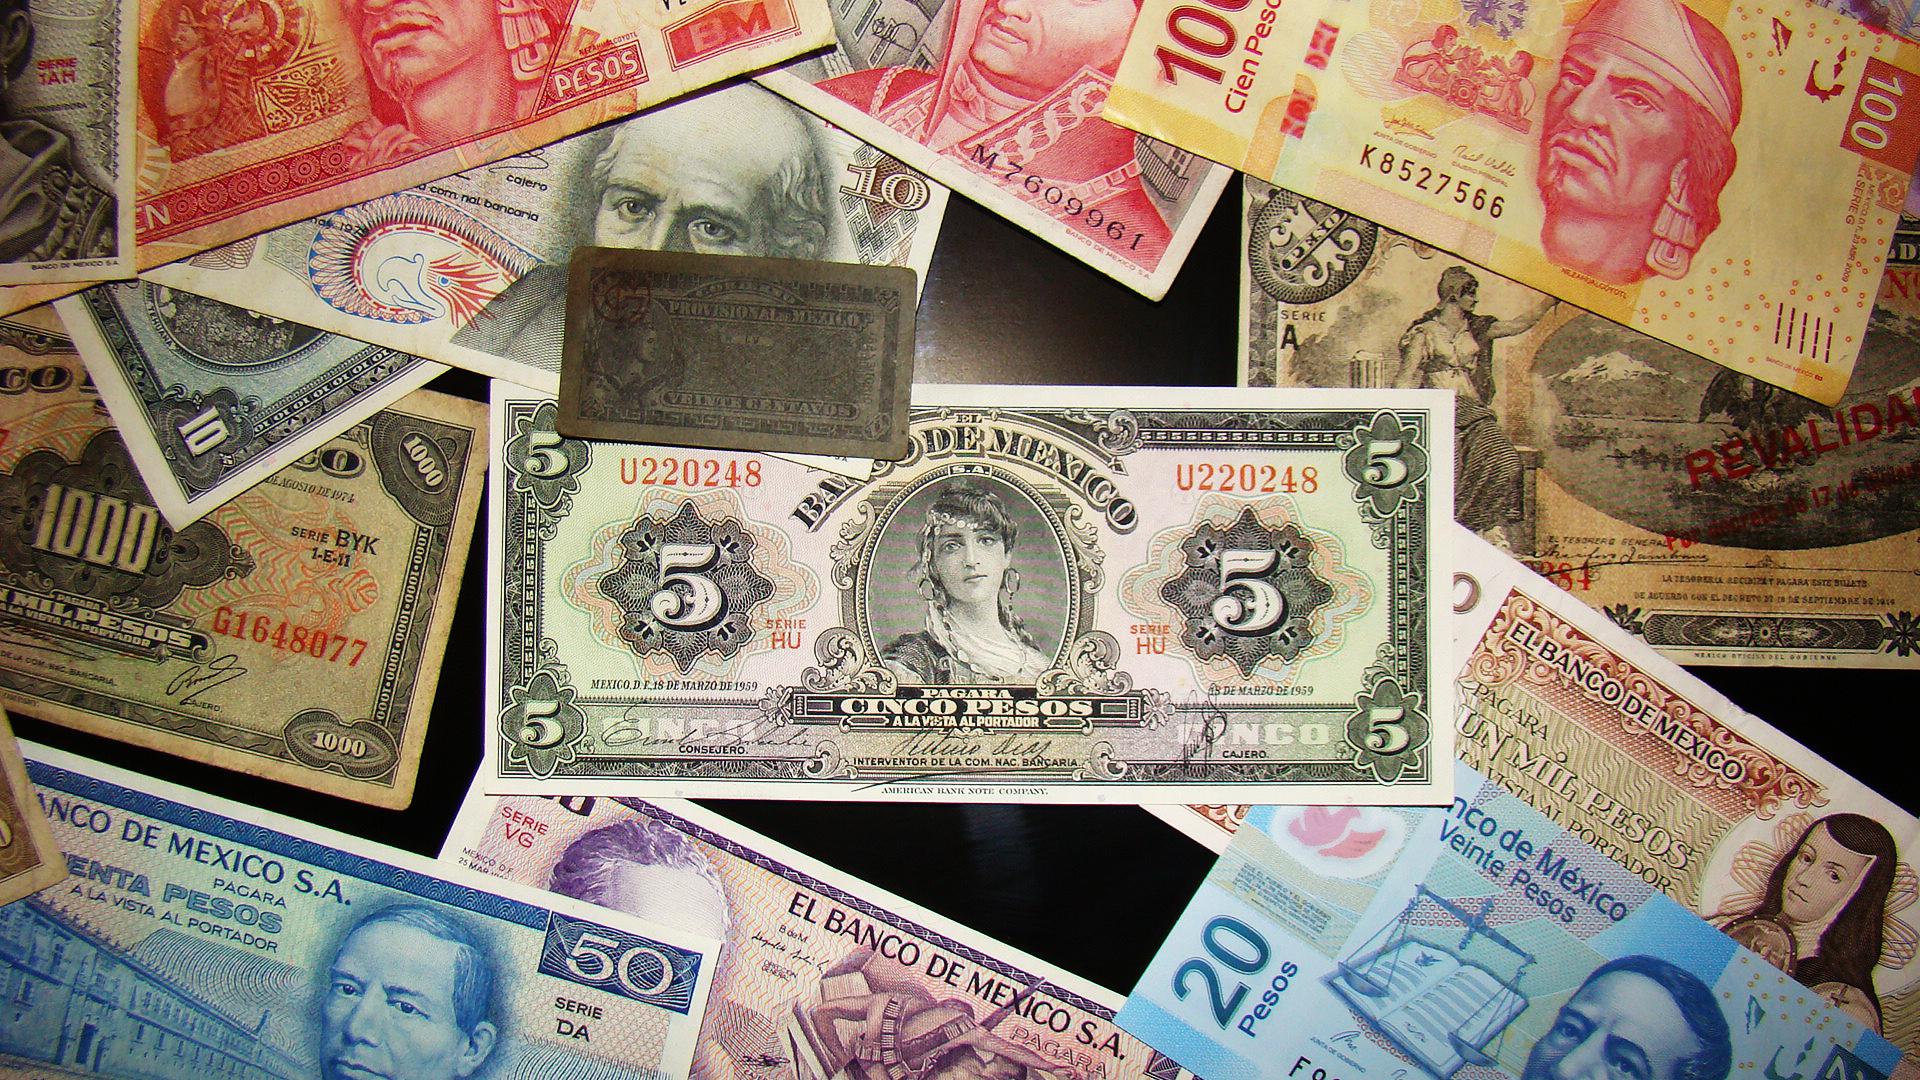 Cool Canadian Money Background